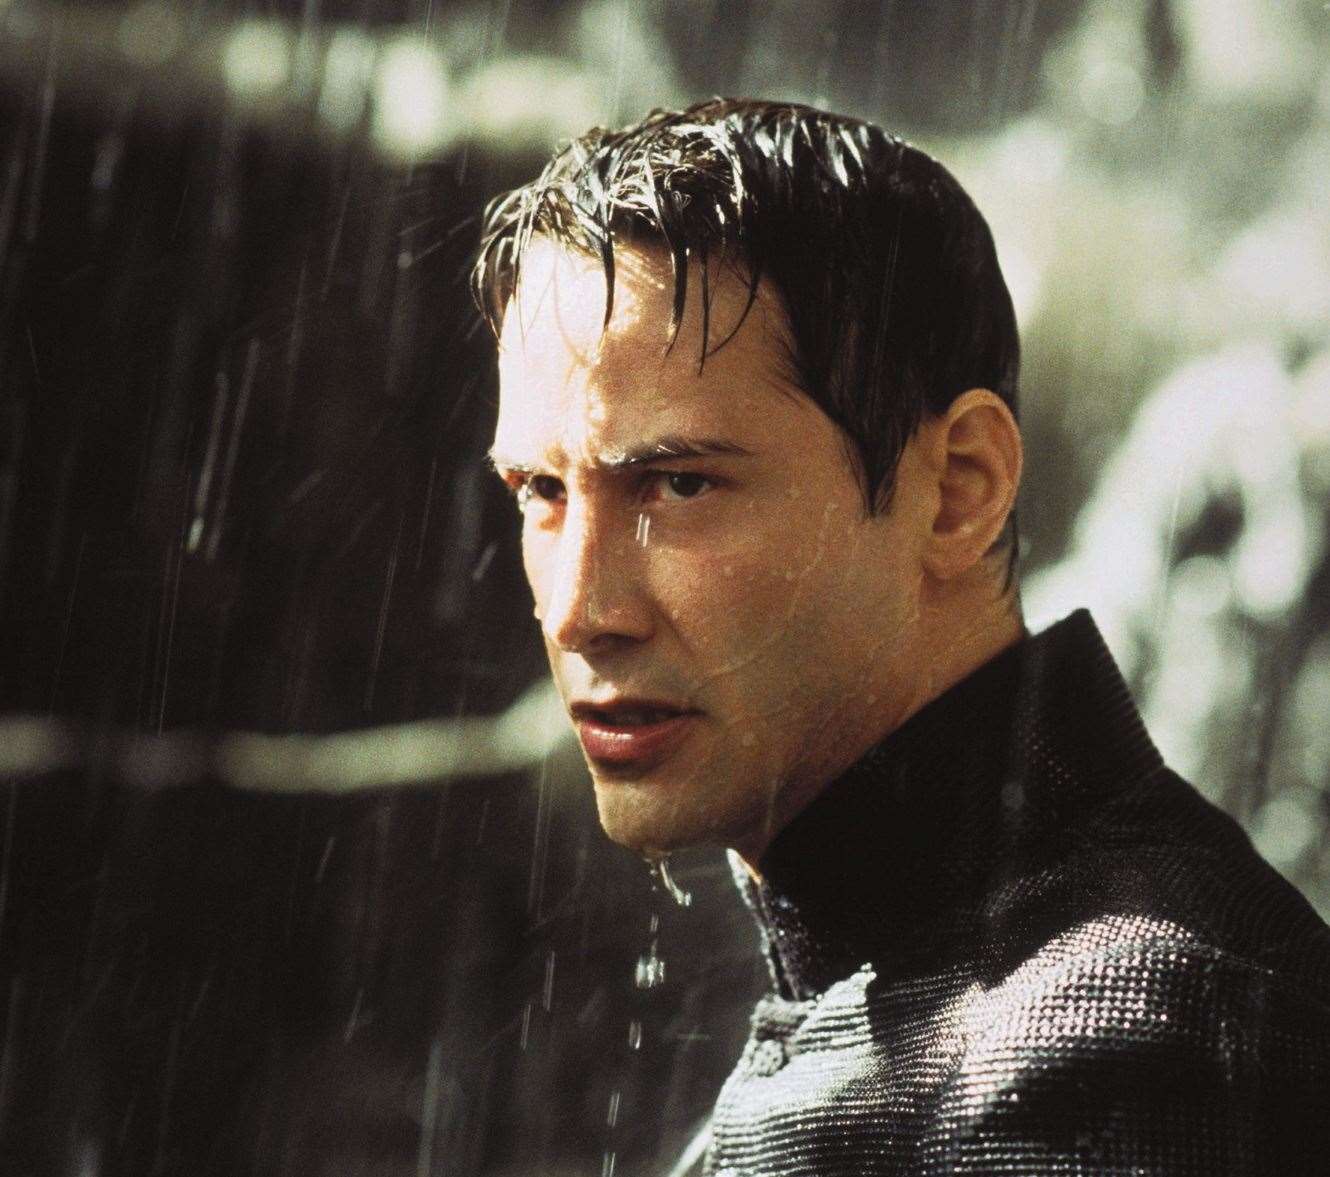 Keanu Reeves in one of the trilogy, The Matrix Revolutions by Warner Bros